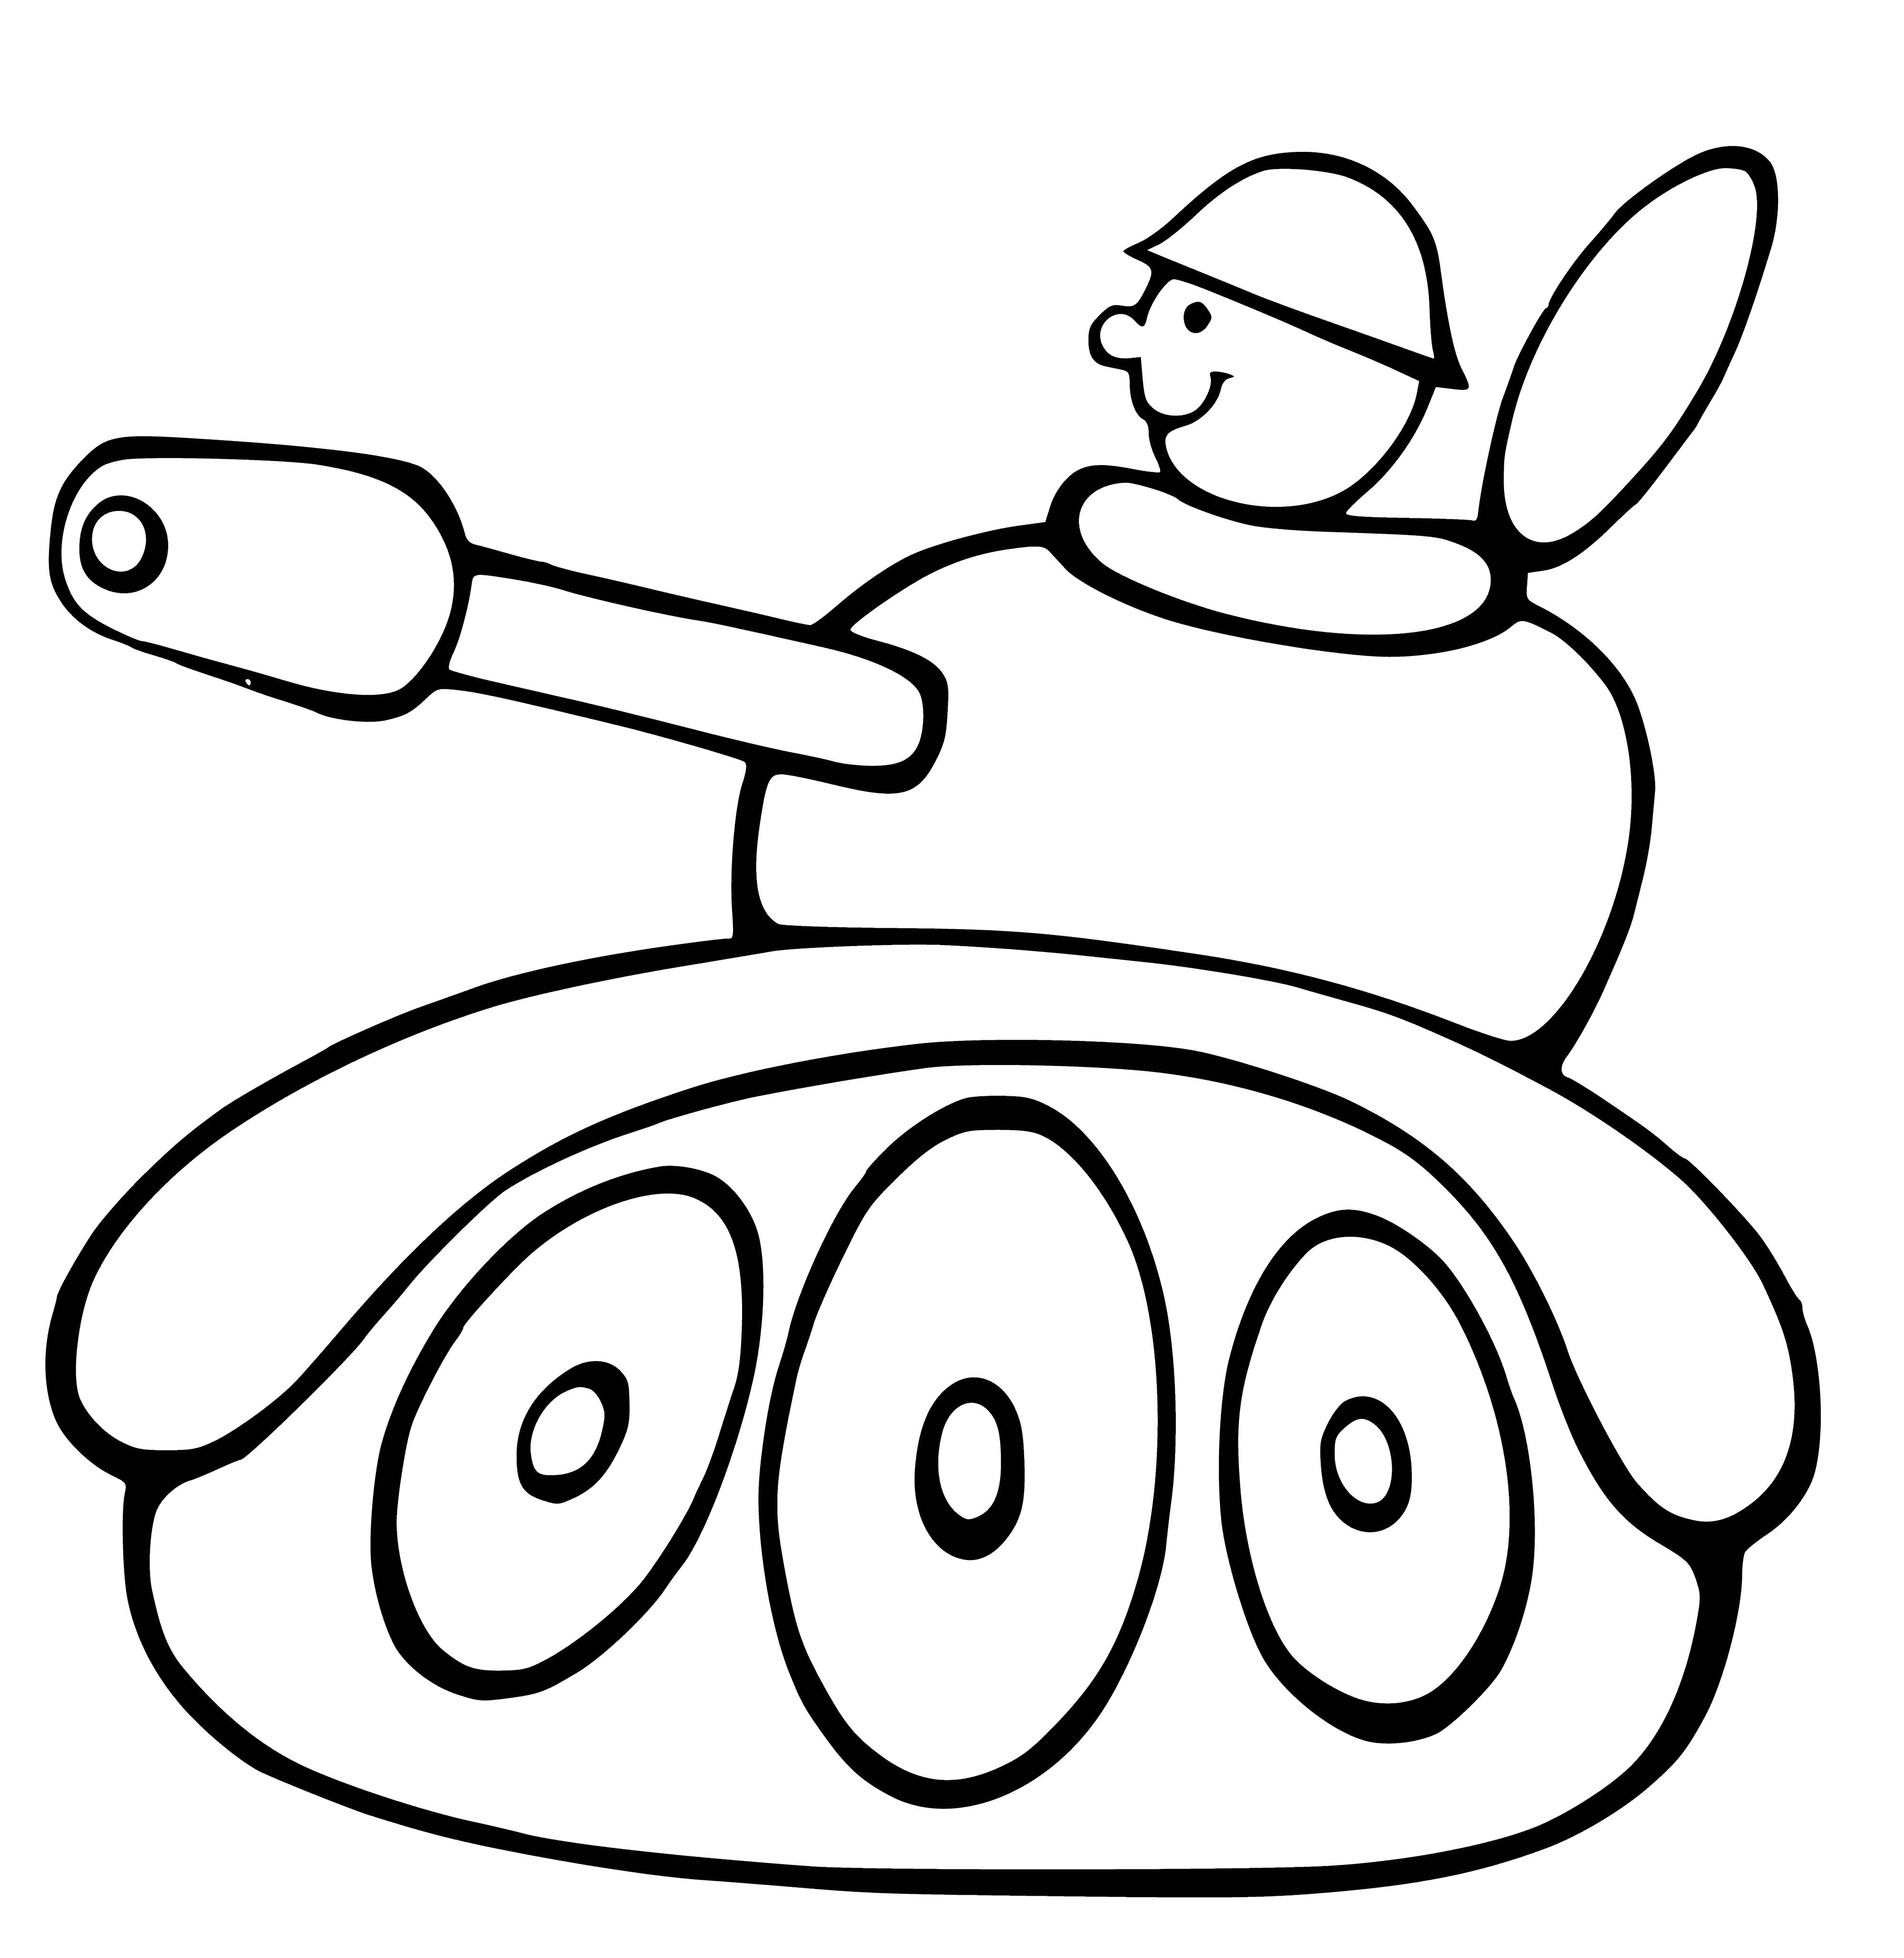 coloring page: Tank: cylindrical metal/plastic container on wheels for storing/transporting liquids/gases, w/curved leading edge, handles & spout for filling/emptying.